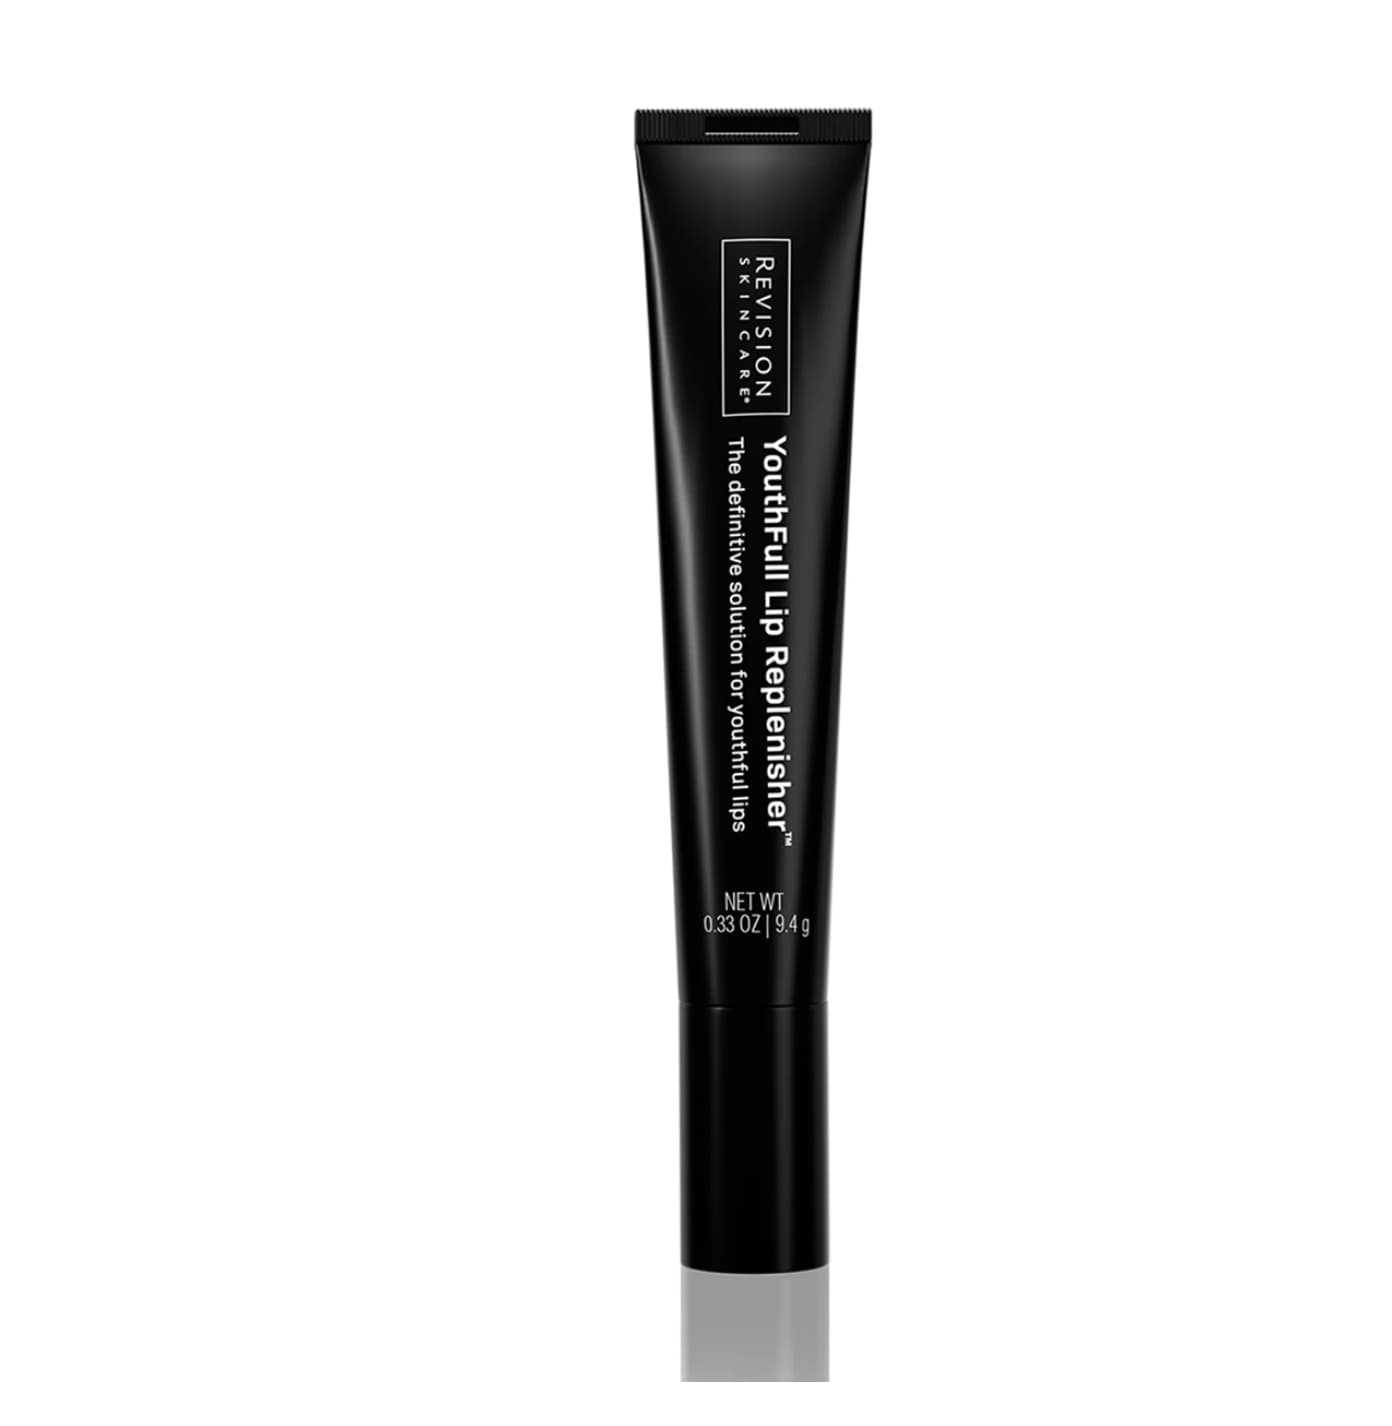 Revision Youthful Lip Replenisher 9.4g